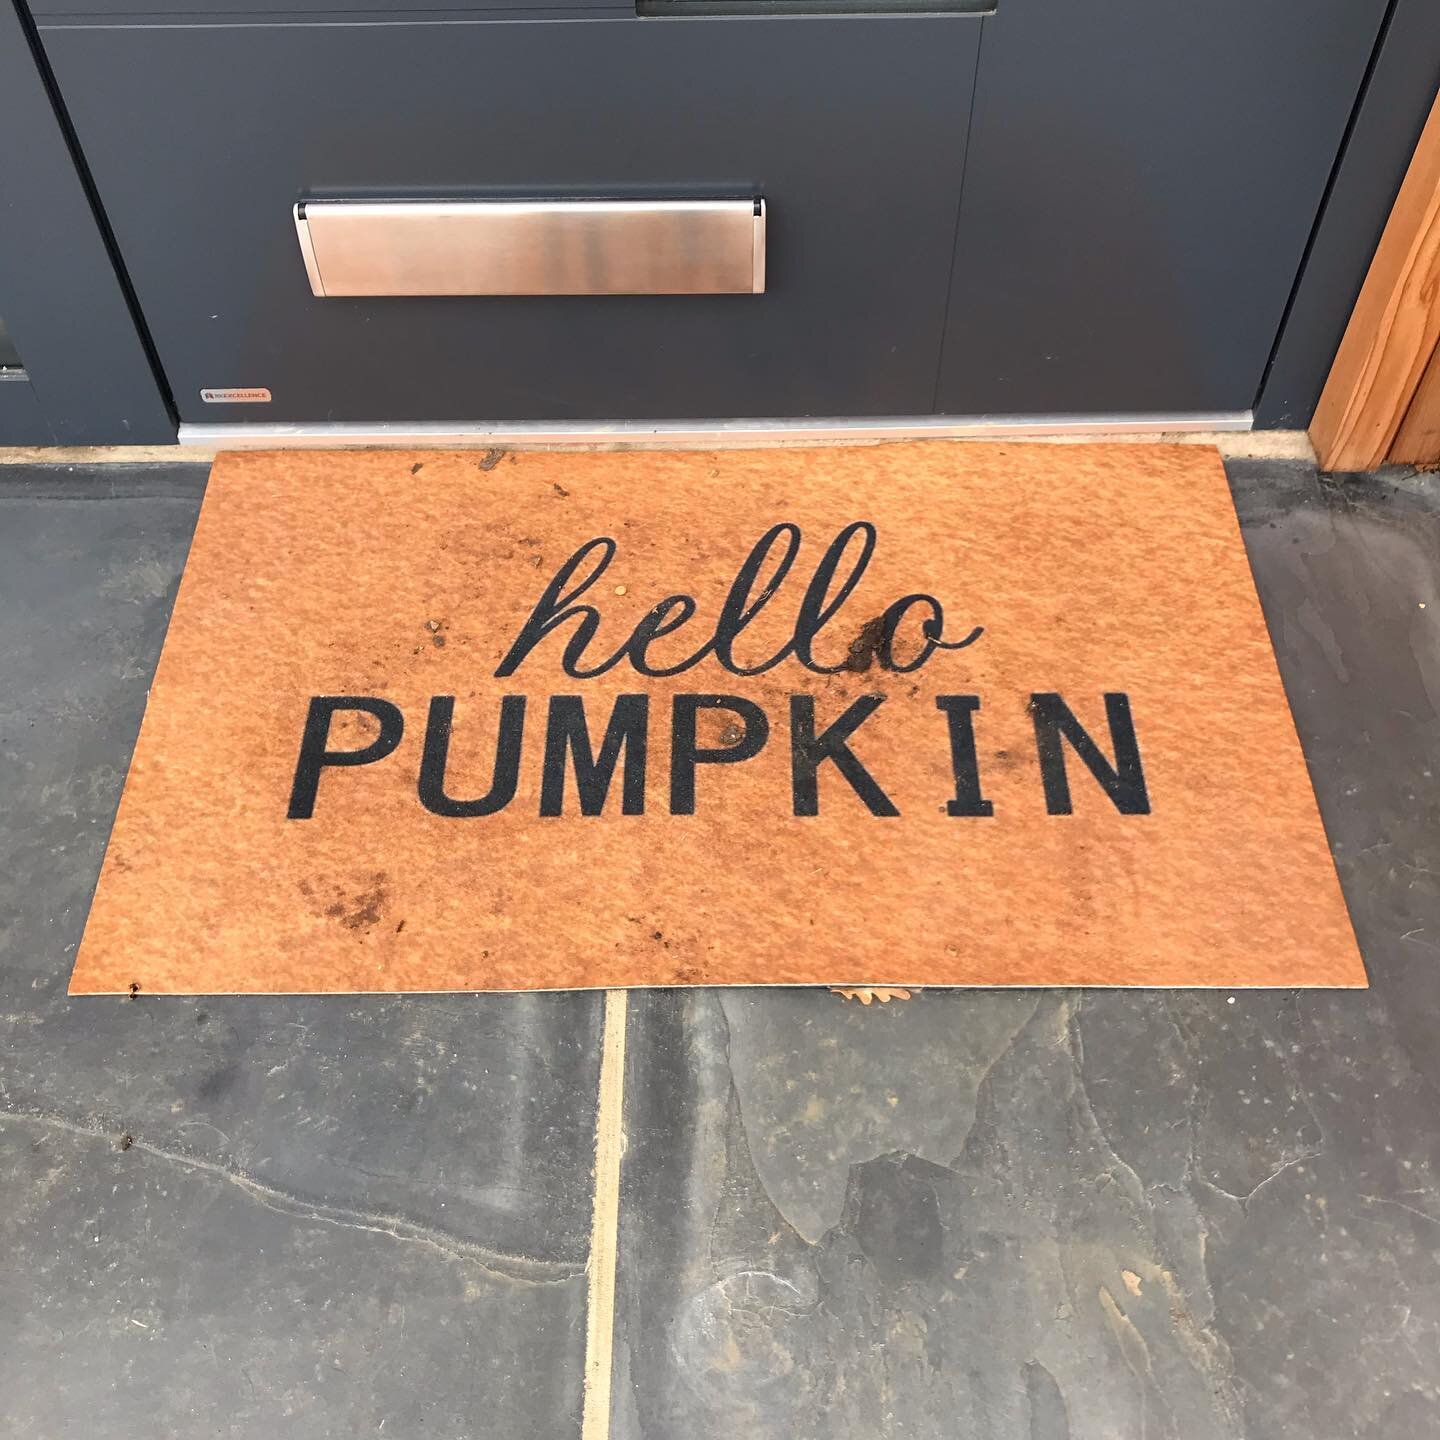 Ta muchly to @rachelwiddicombe for this morning, loving your doormat 😂🎃